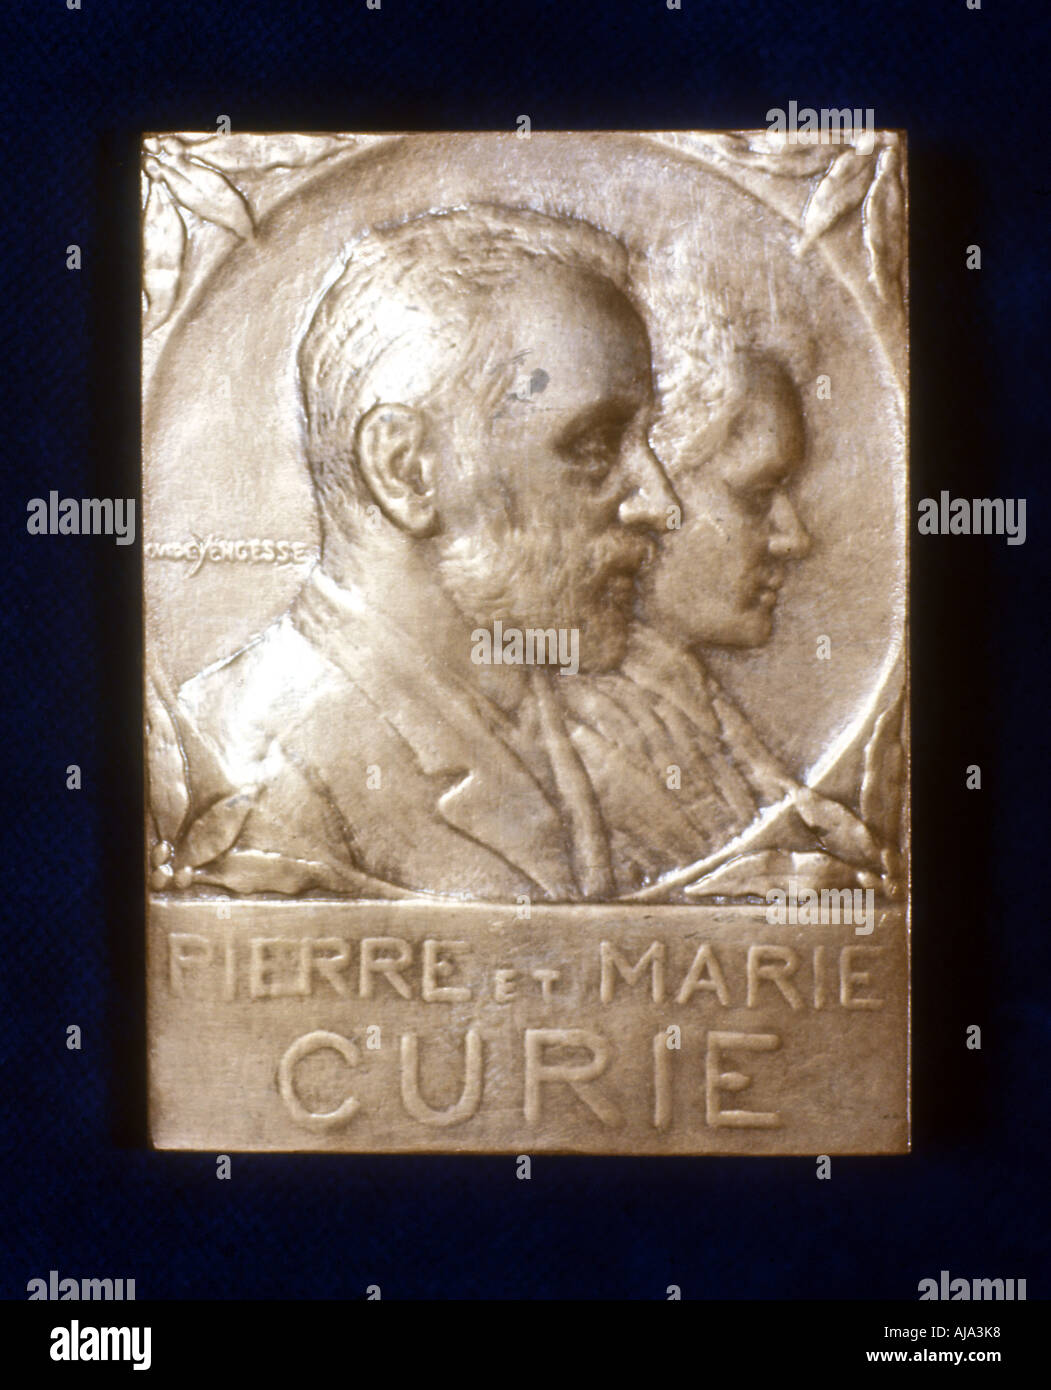 Pierre and Marie Curie, French physicists. Artist: Unknown Stock Photo